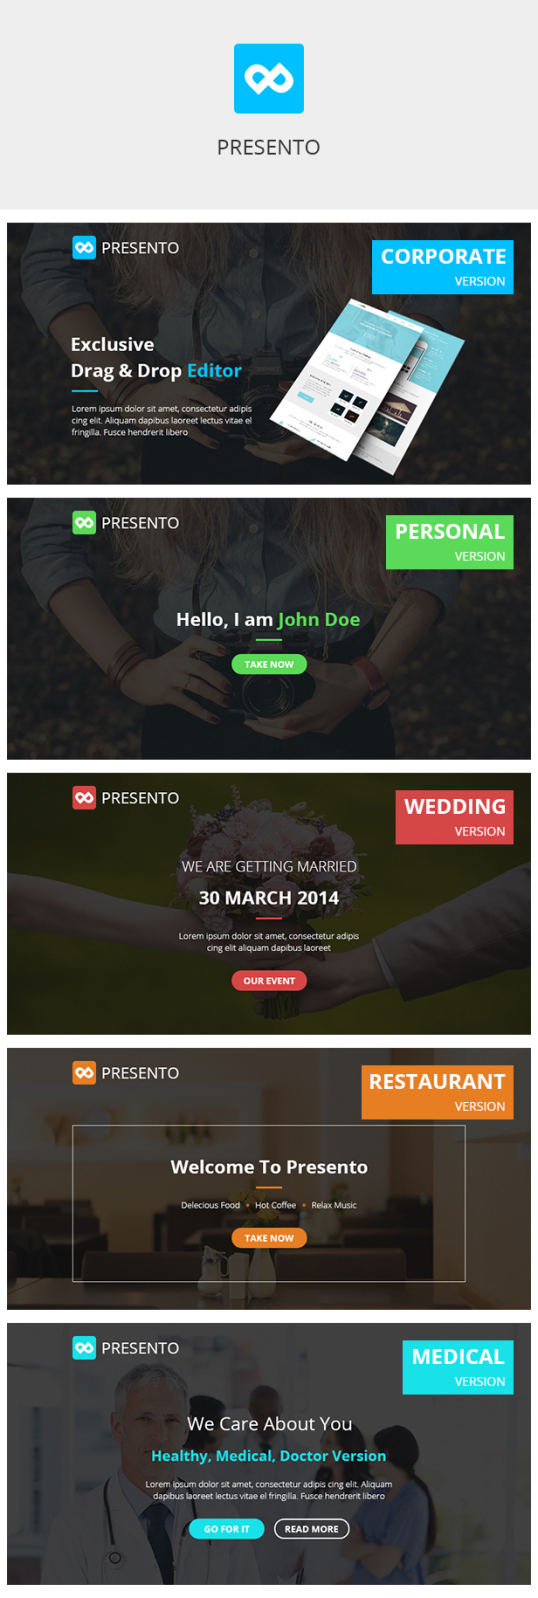 Presento - Corporate, Personal, Wedding, Restaurant, Medical Email + Builder Access - 1